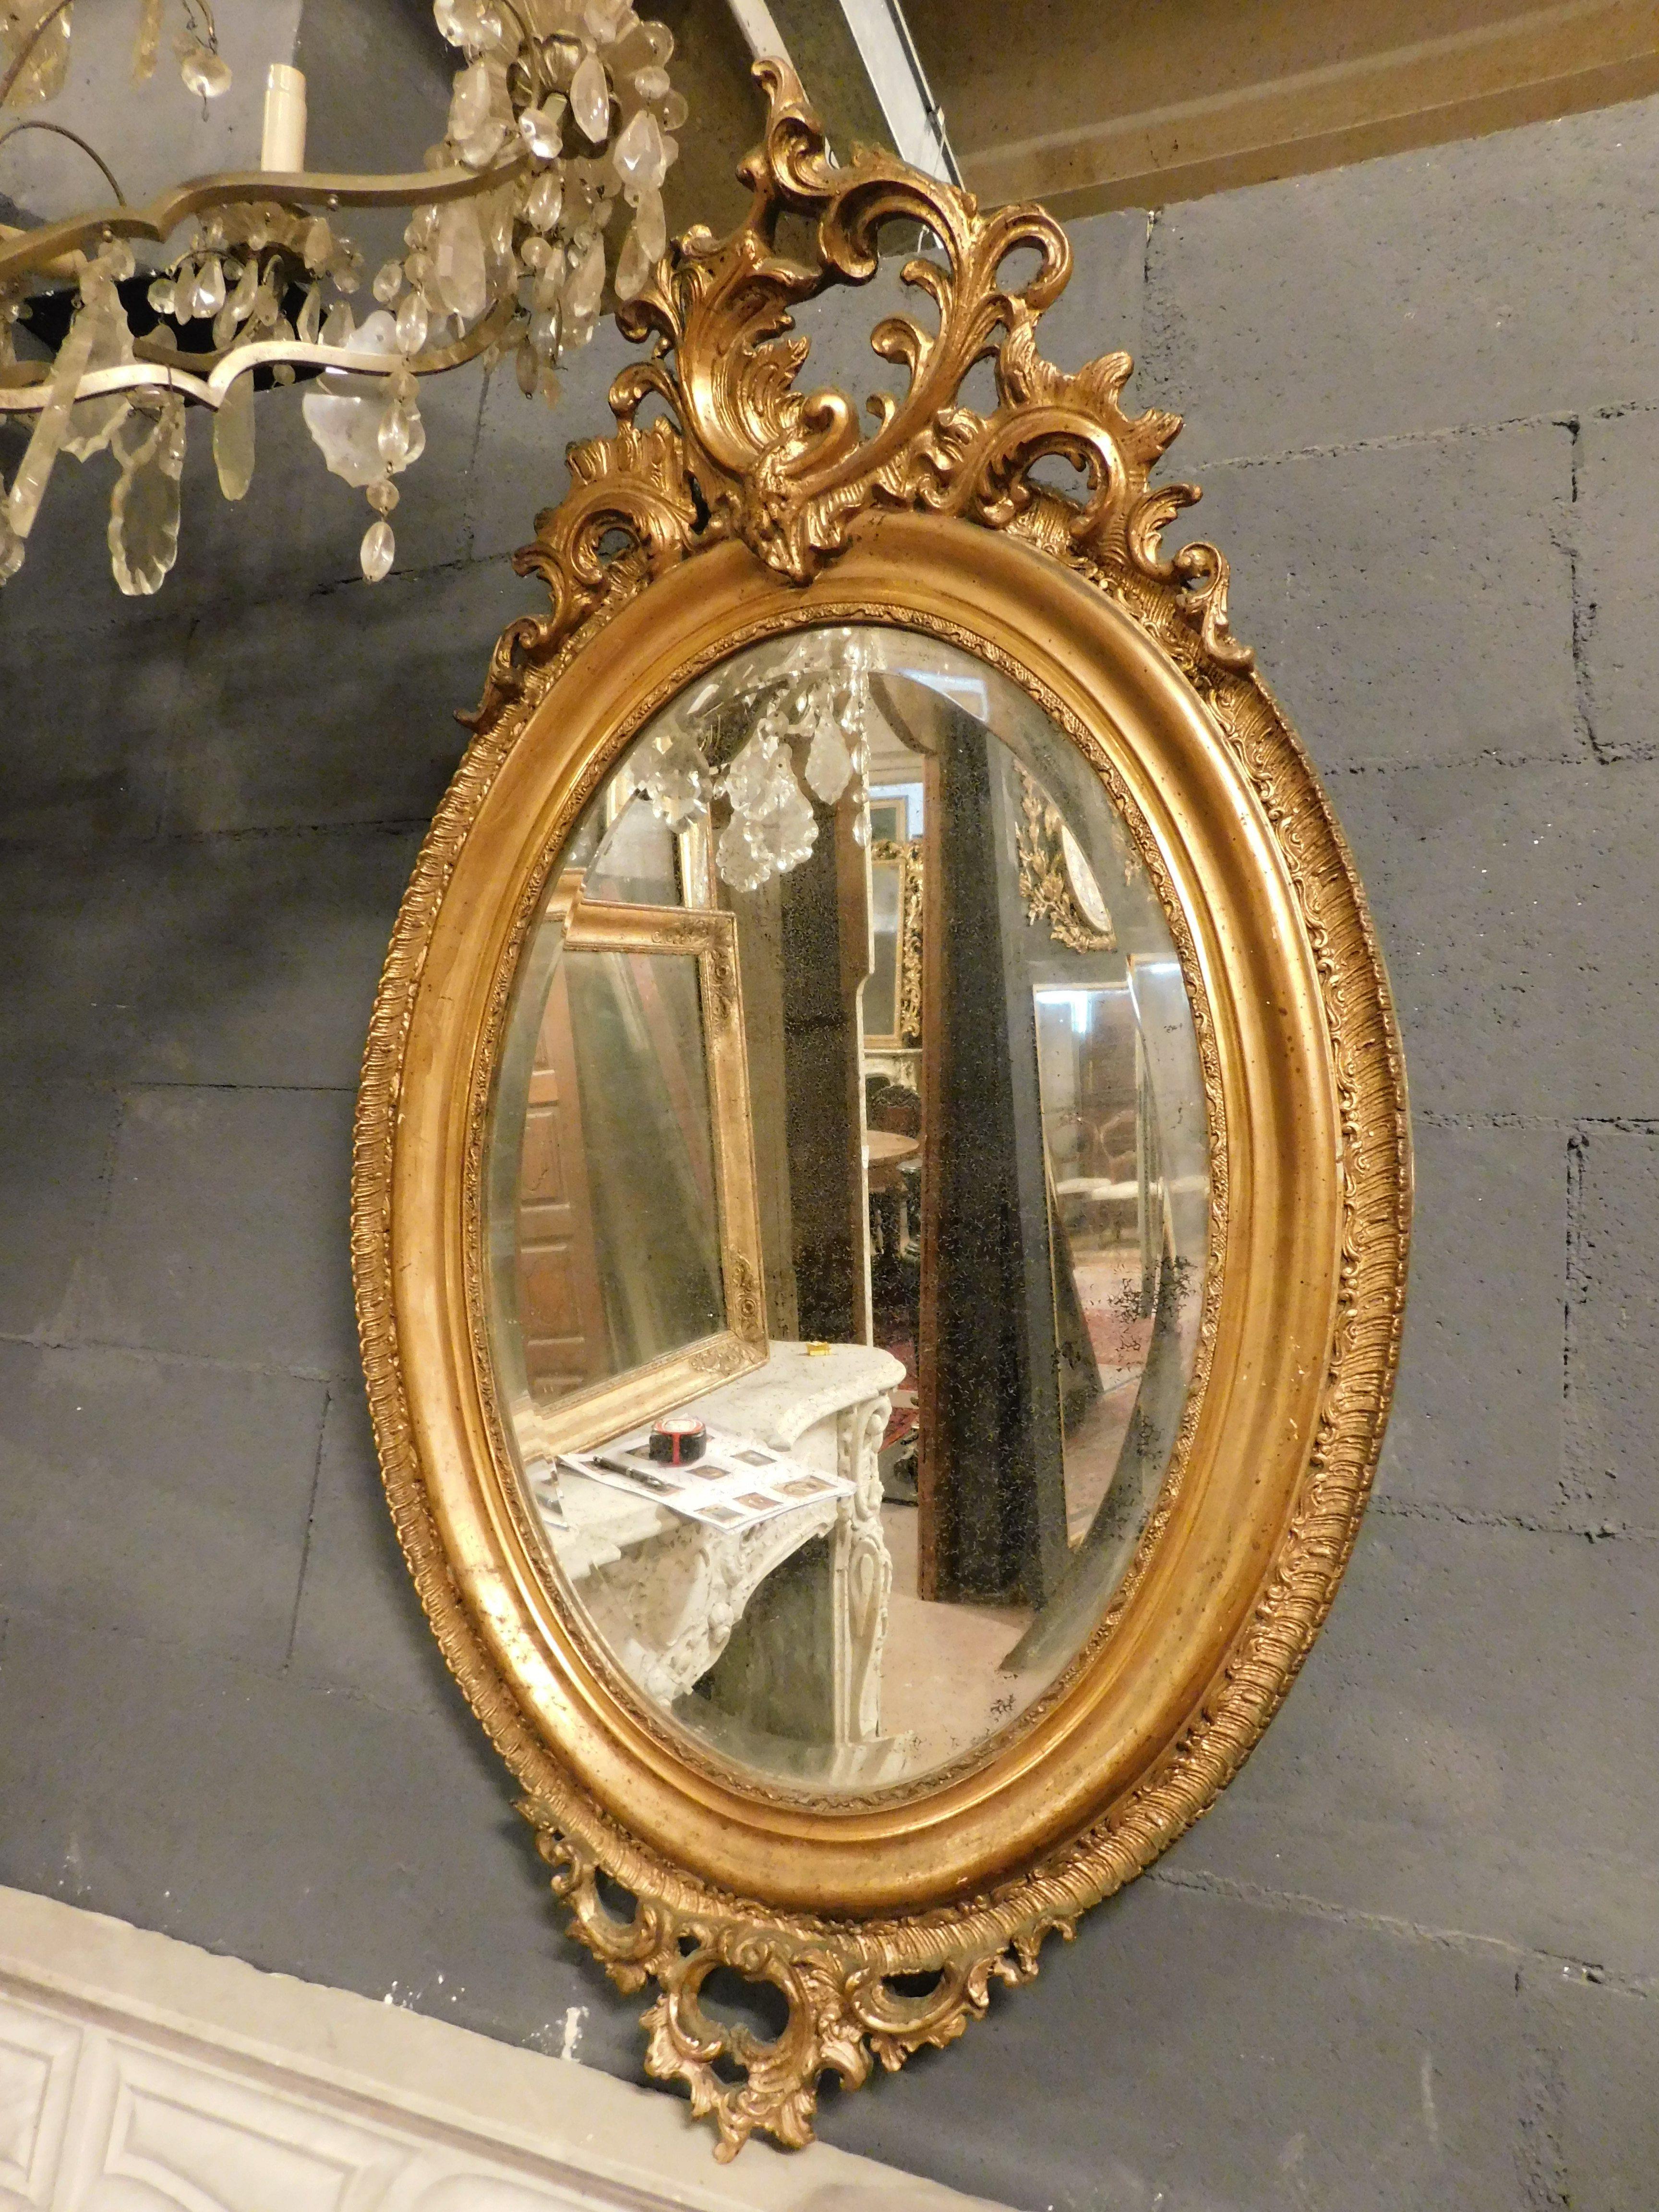 Antique oval mirror in gilded wood with carved cymatium, from France from the 19th century, maximum size W 62 x H 110 cm